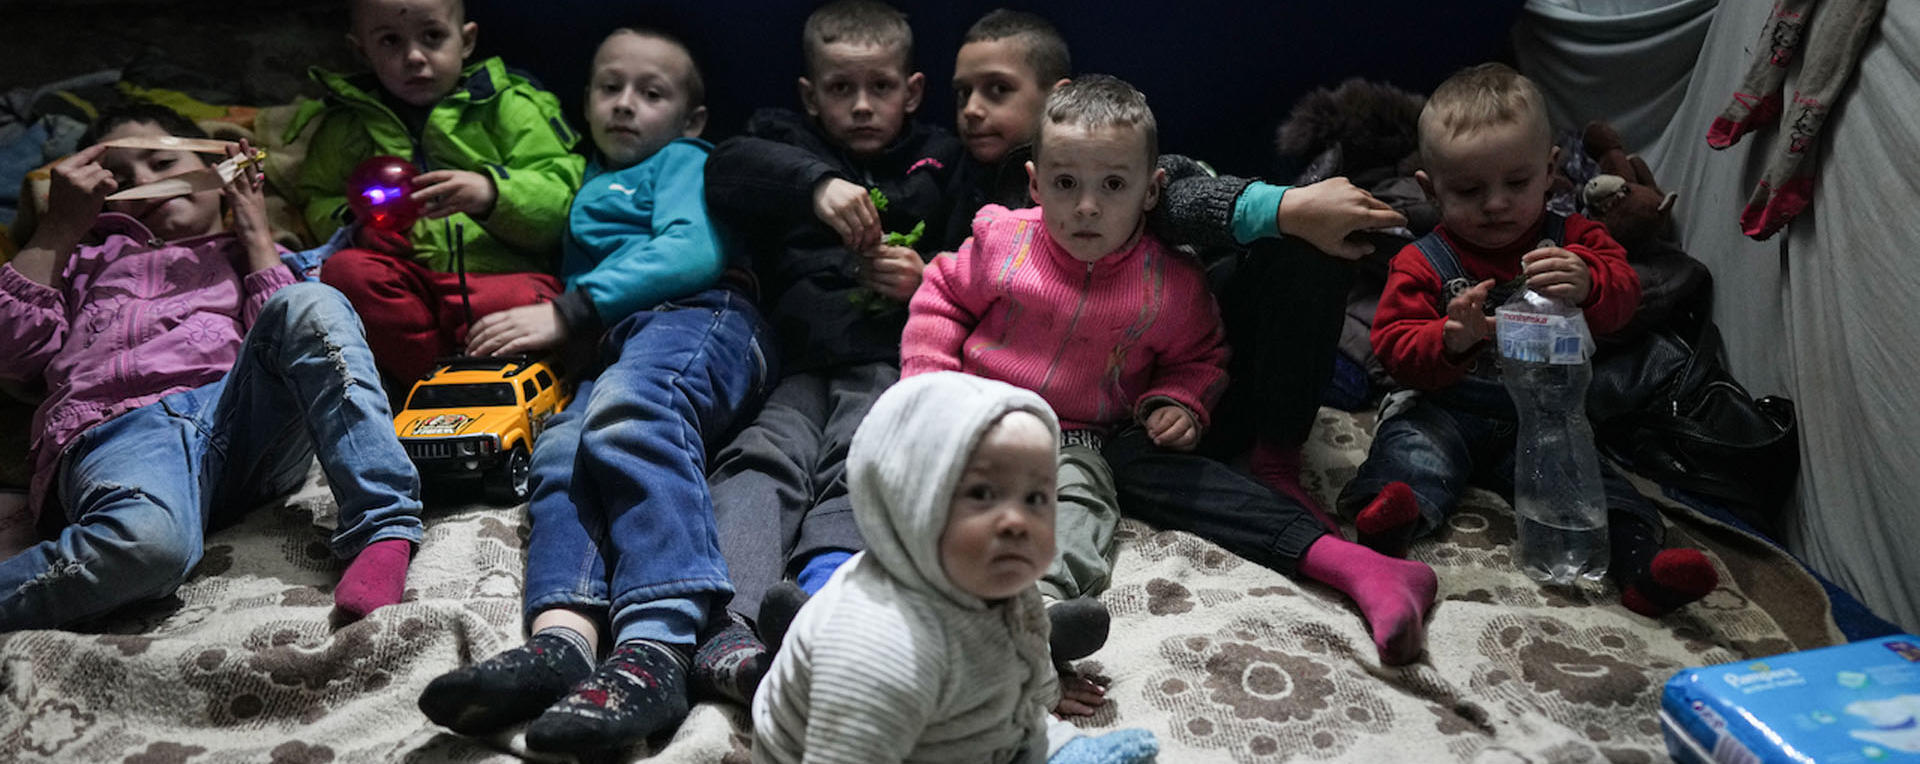 a group of children waiting in a bomb shelter for an air raid alert